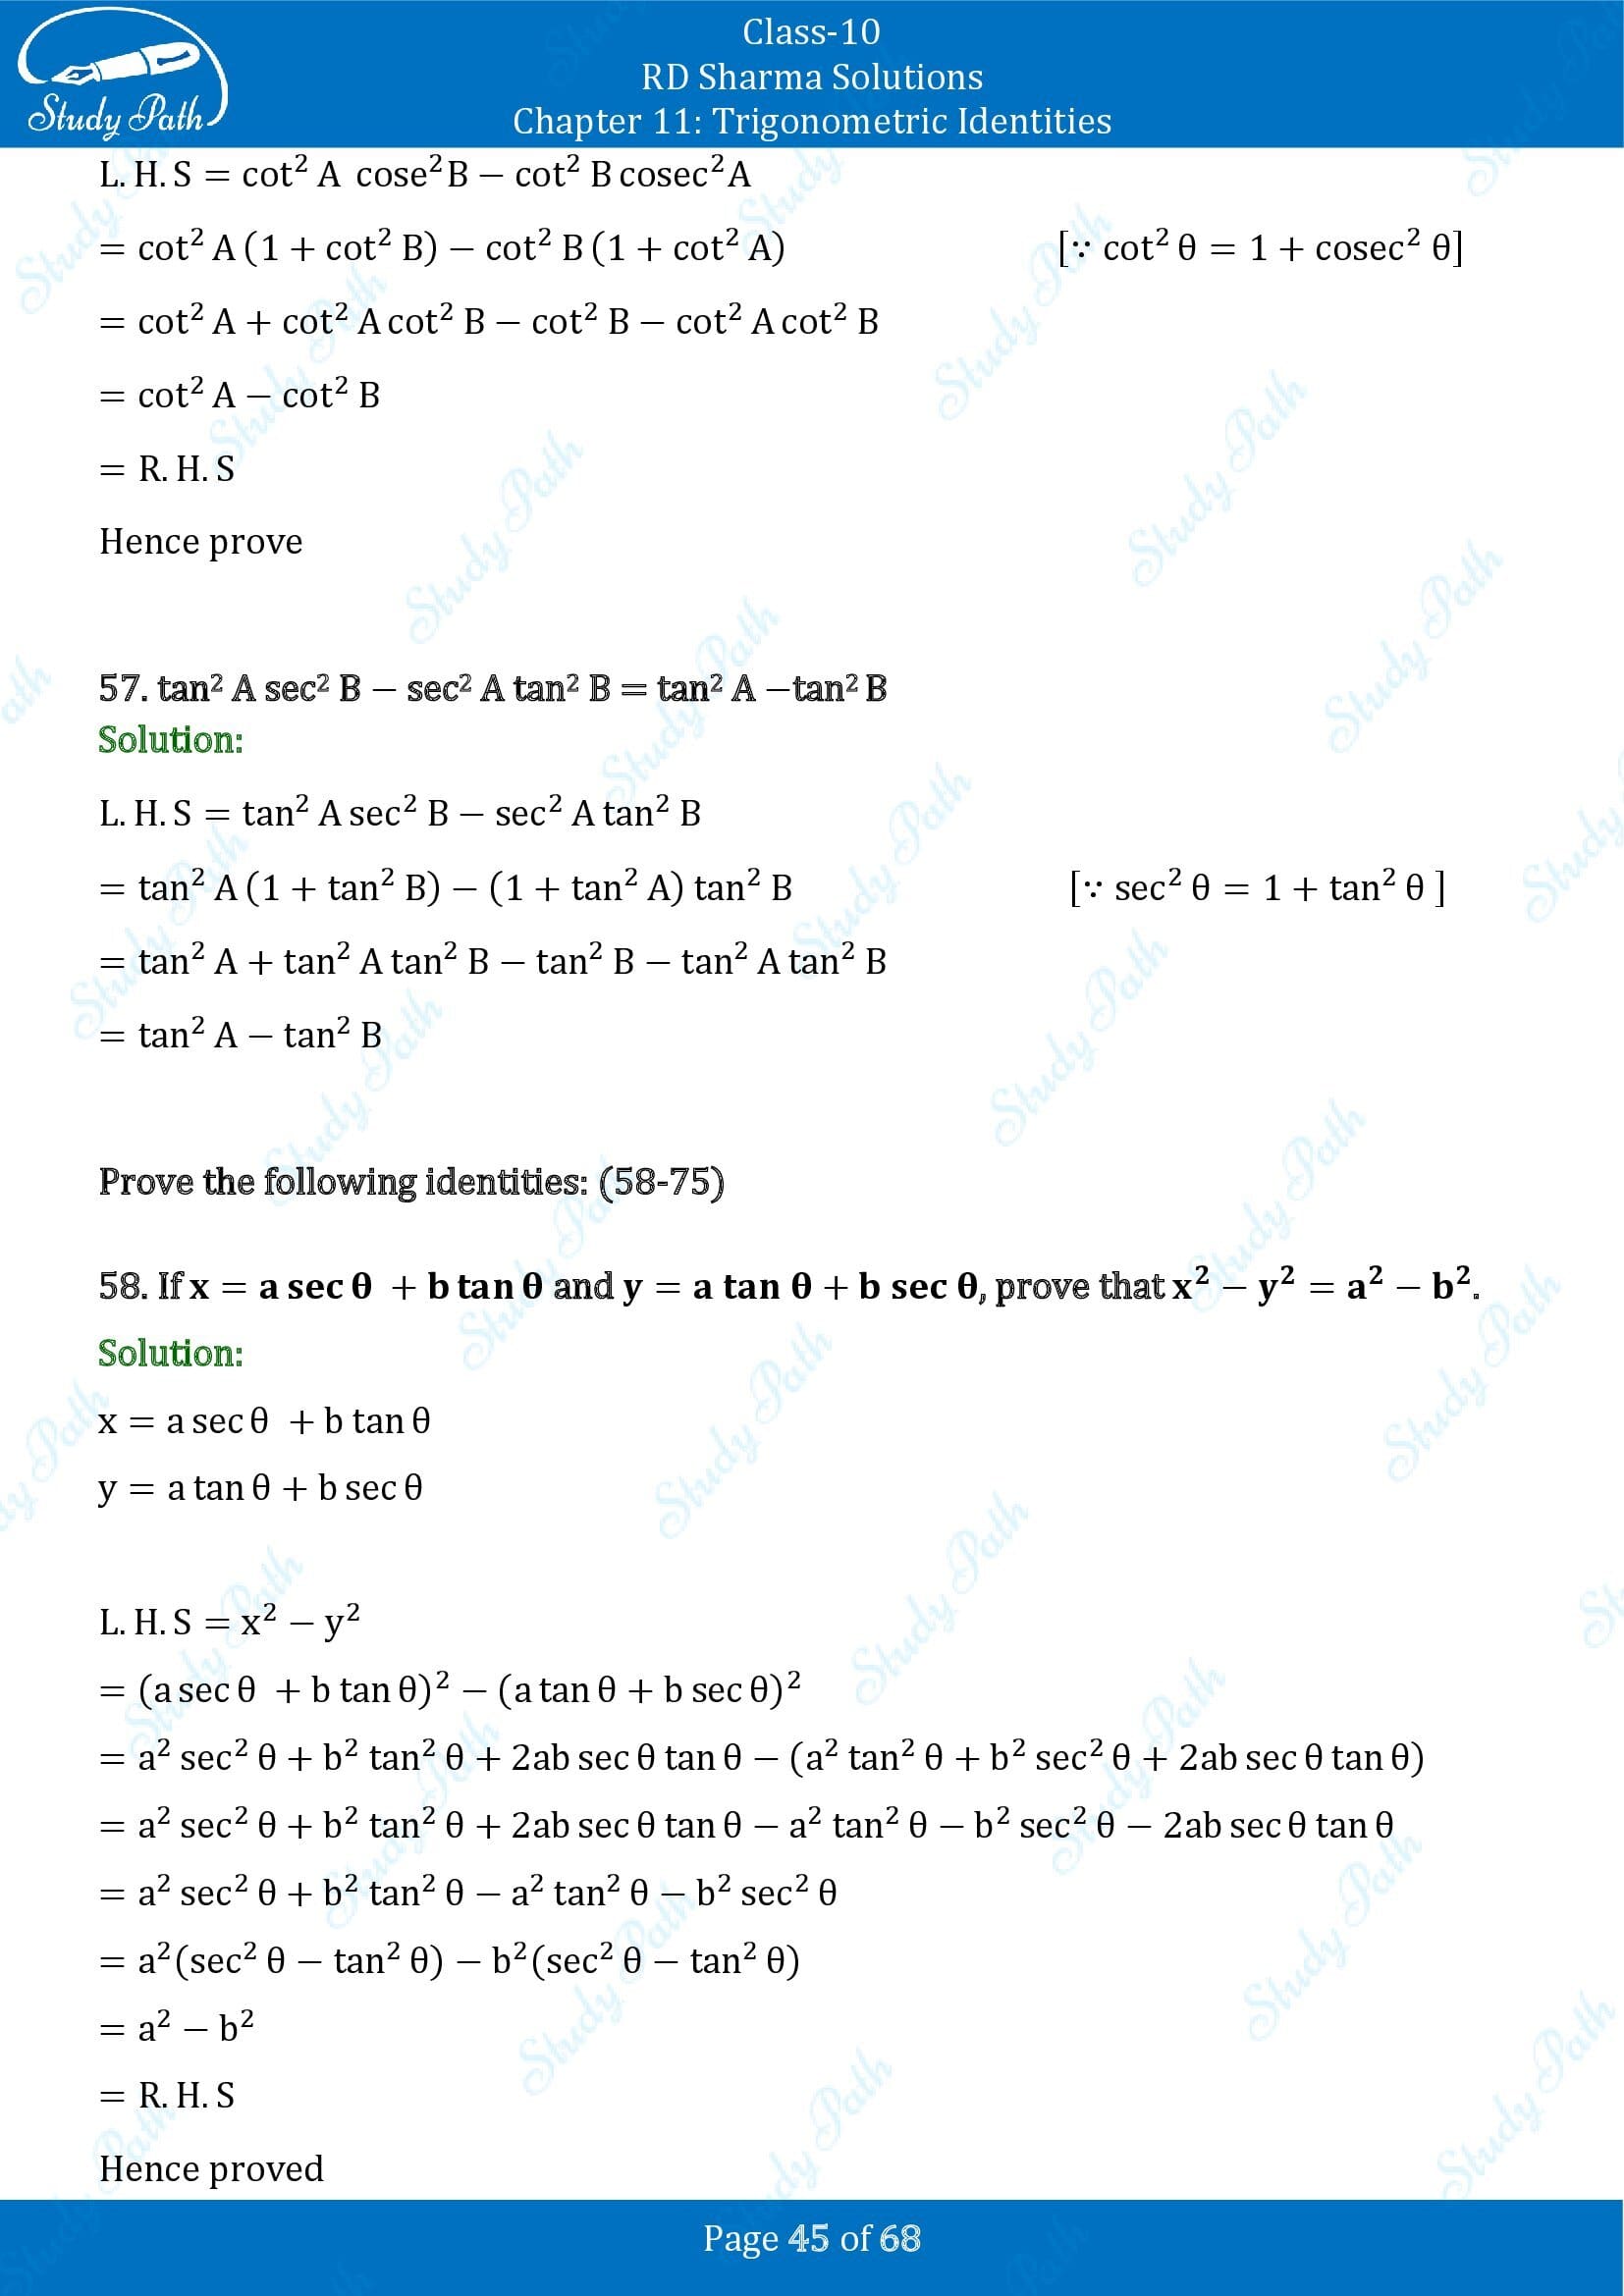 RD Sharma Solutions Class 10 Chapter 11 Trigonometric Identities Exercise 11.1 00045